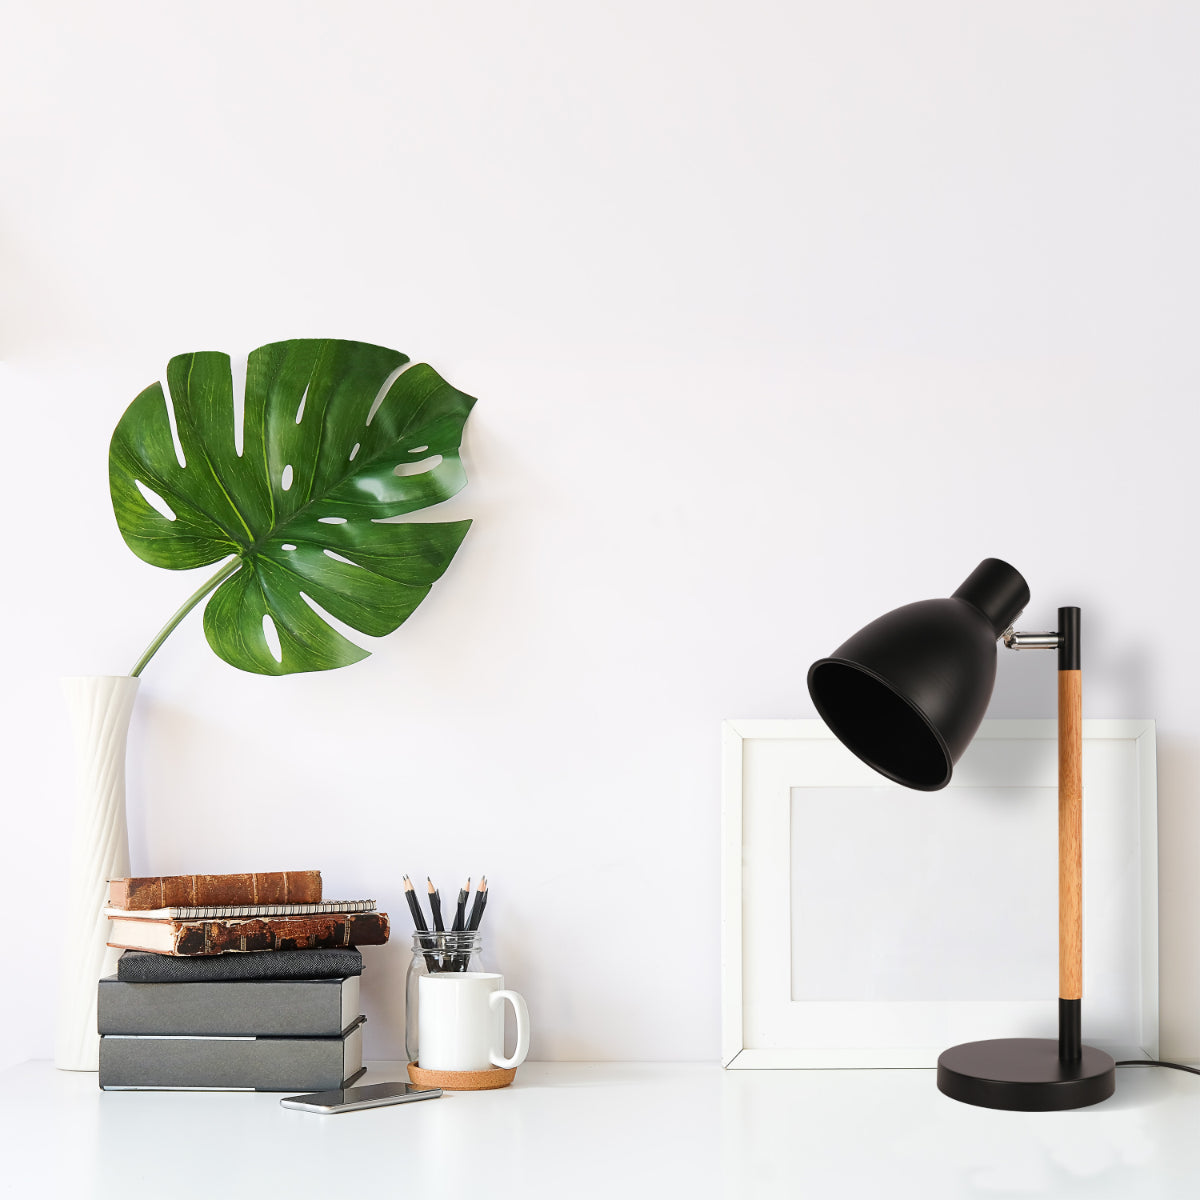 Where to use Nordic Elegance Desk Lamp with Dominant Wood Feature 130-03644